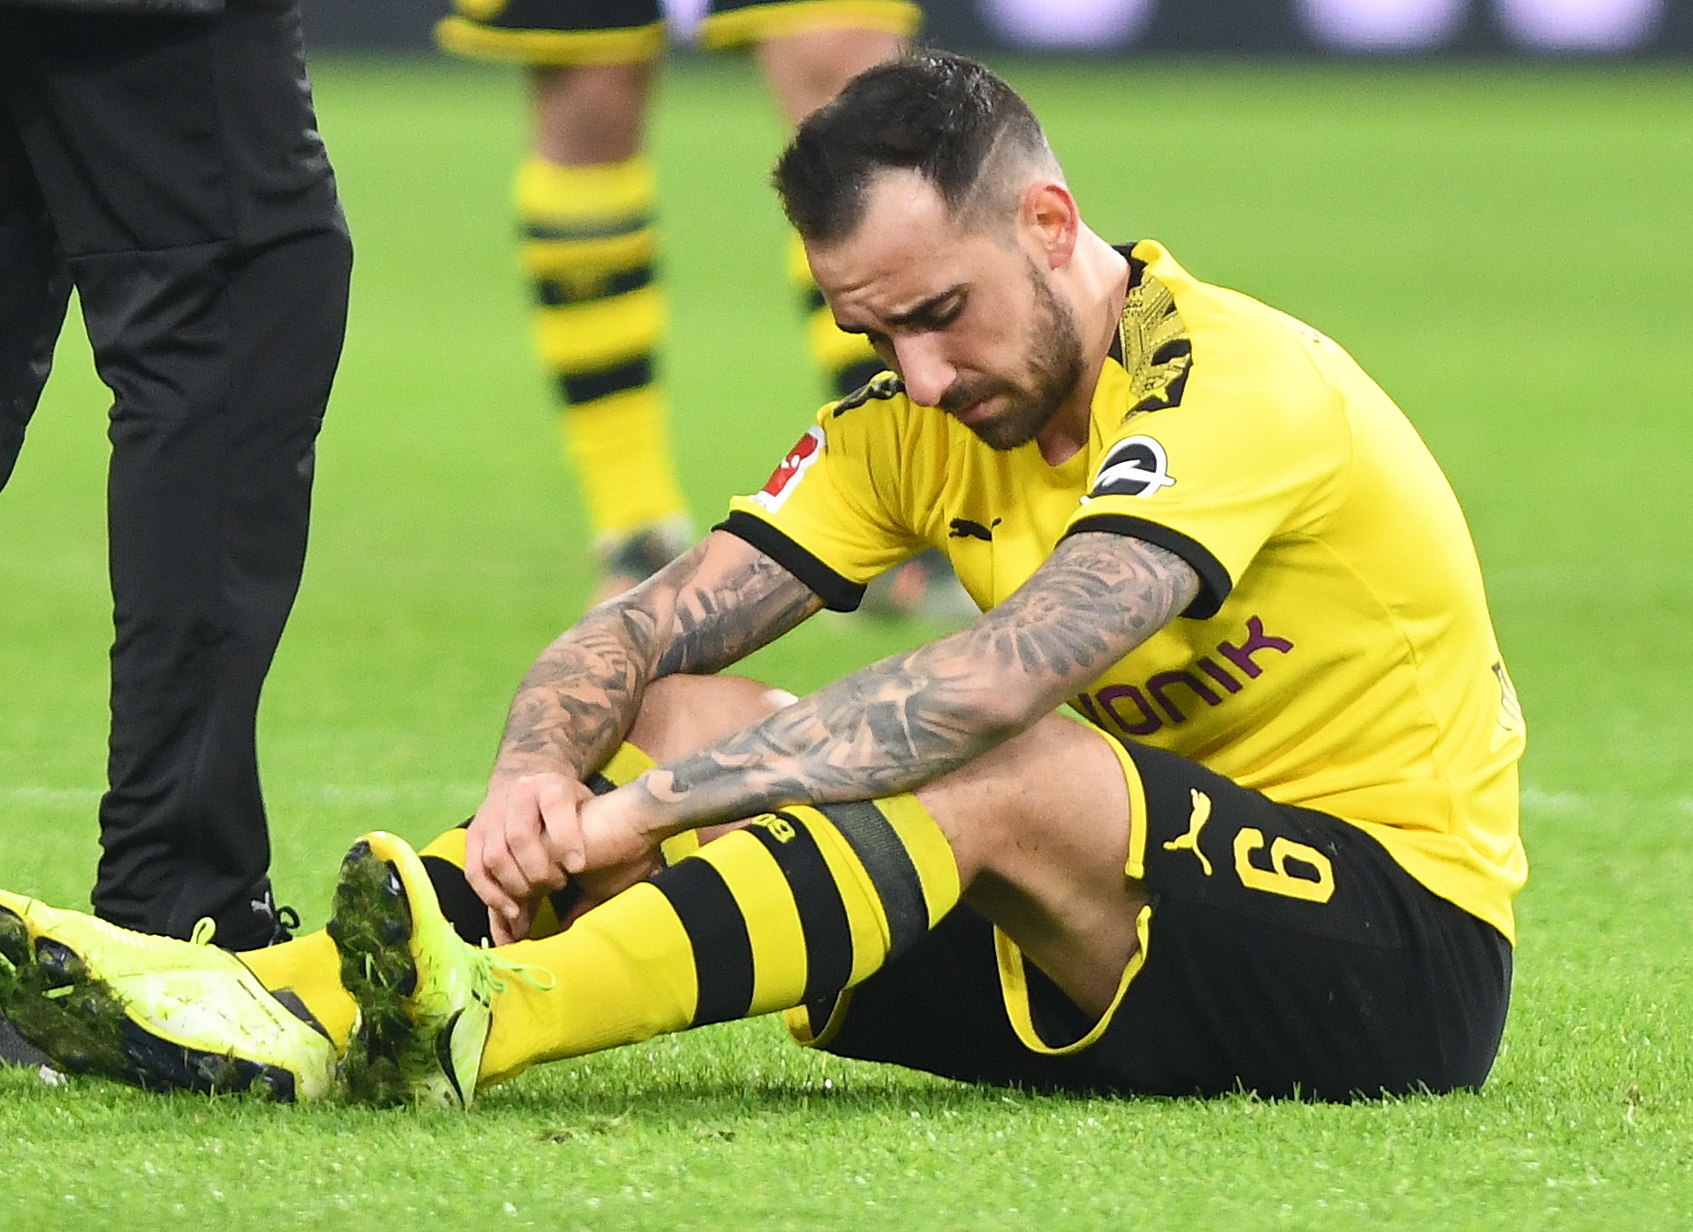 Dortmund (Germany), 22/11/2019.- Dortmunds Paco <HIT>Alcacer</HIT> reacts during the German Bundesliga soccer match between Borussia Dortmund and SC Paderborn in Dortmund, Germany, 22 November 2019. (Alemania, Rusia) EFE/EPA/DAVID HECKER (DFL regulations prohibit any use of photographs as image sequences and/or quasi-video)